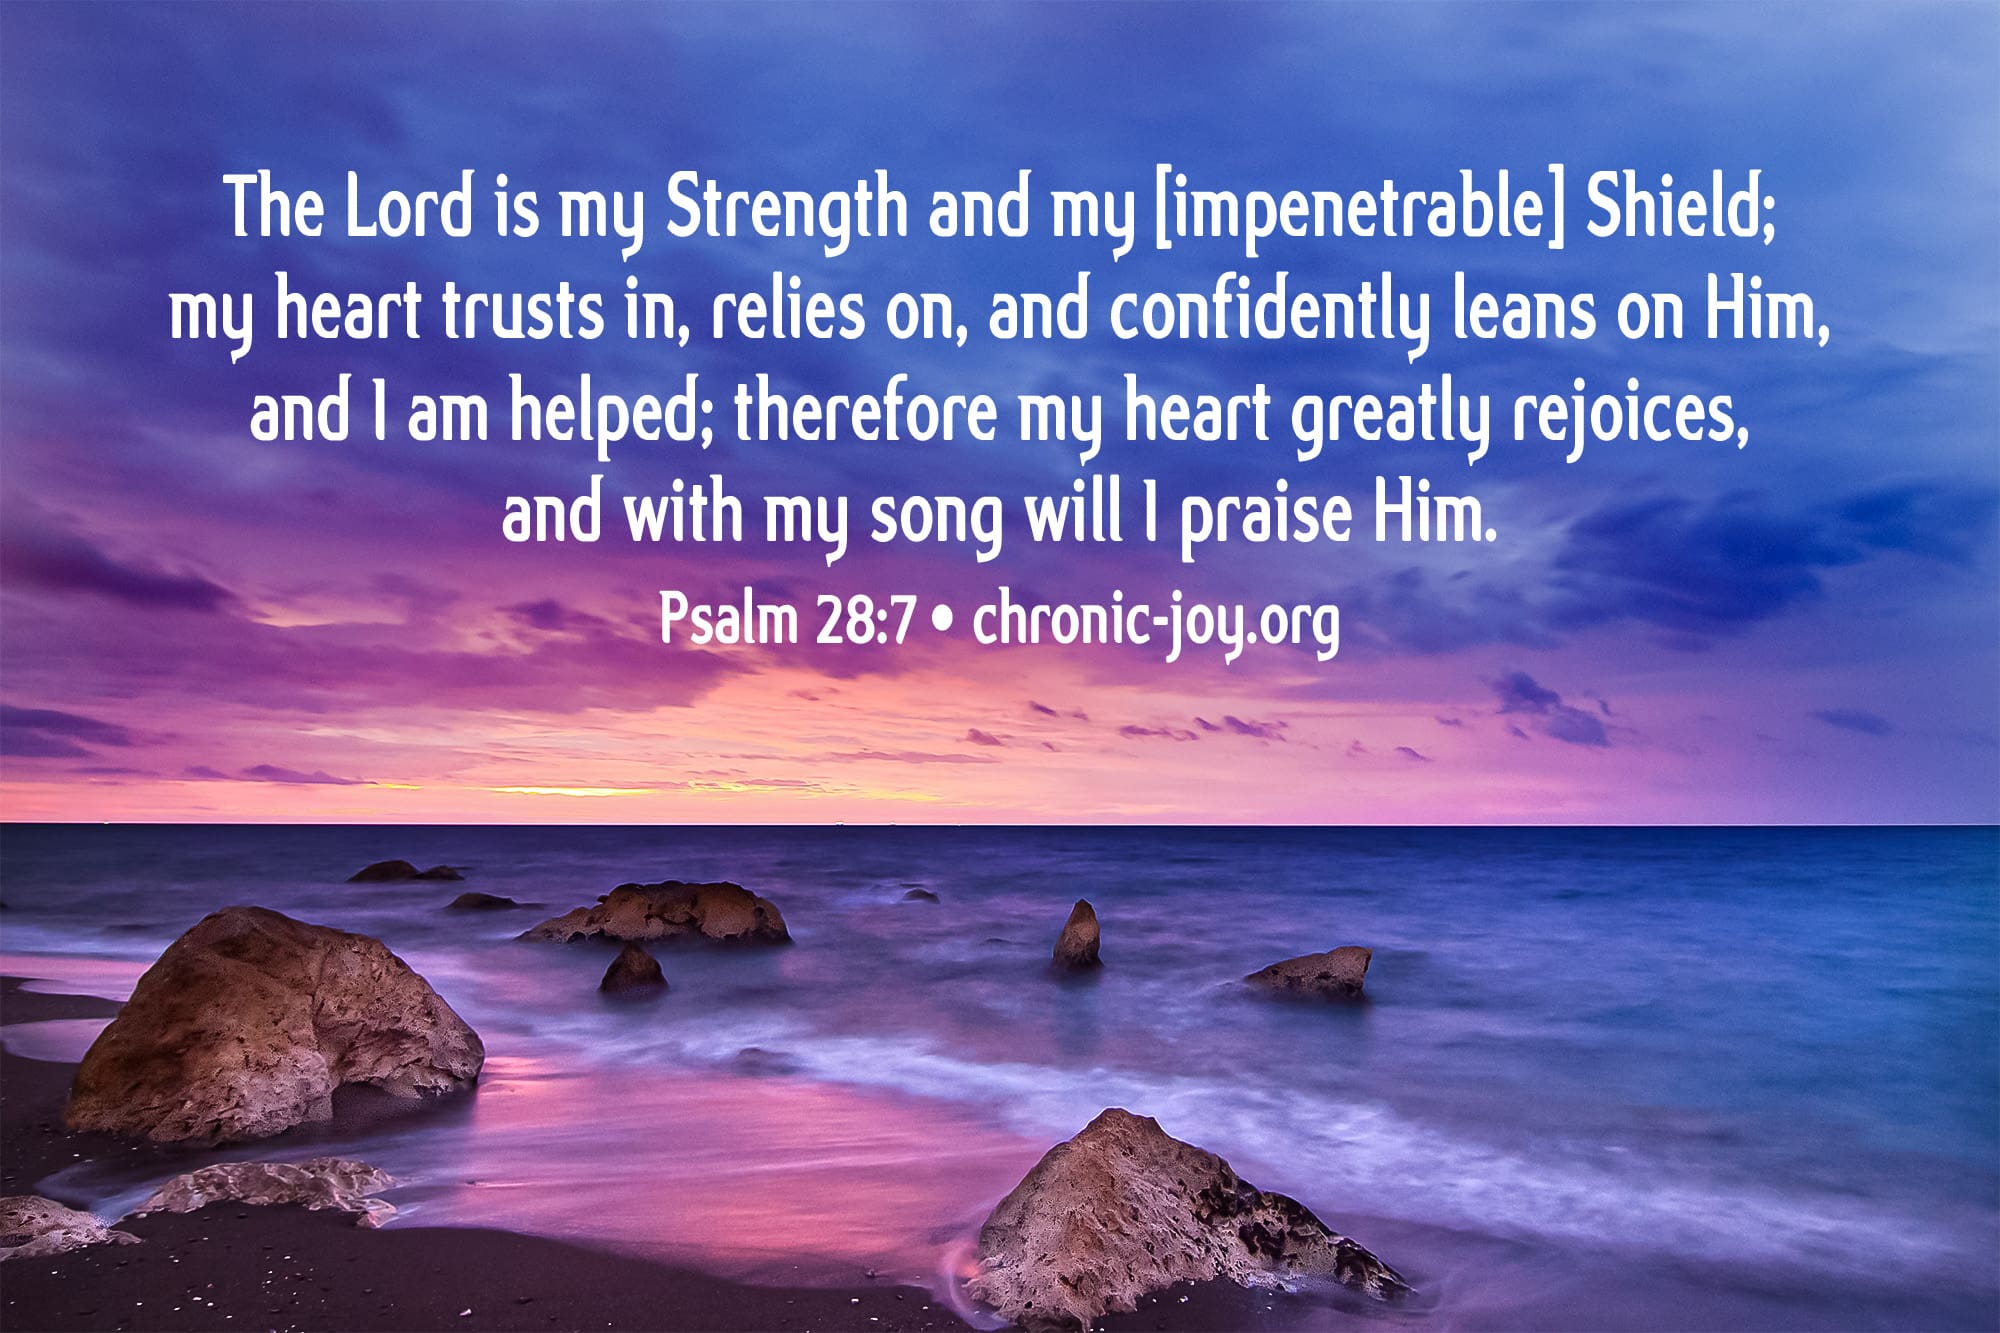 "The Lord is my Strength and my [impenetrable] Shield; my heart trusts in, relies on, and confidently leans on Him, and I am helped; therefore my heart greatly rejoices, and with my song will I praise Him." Psalm 28:7